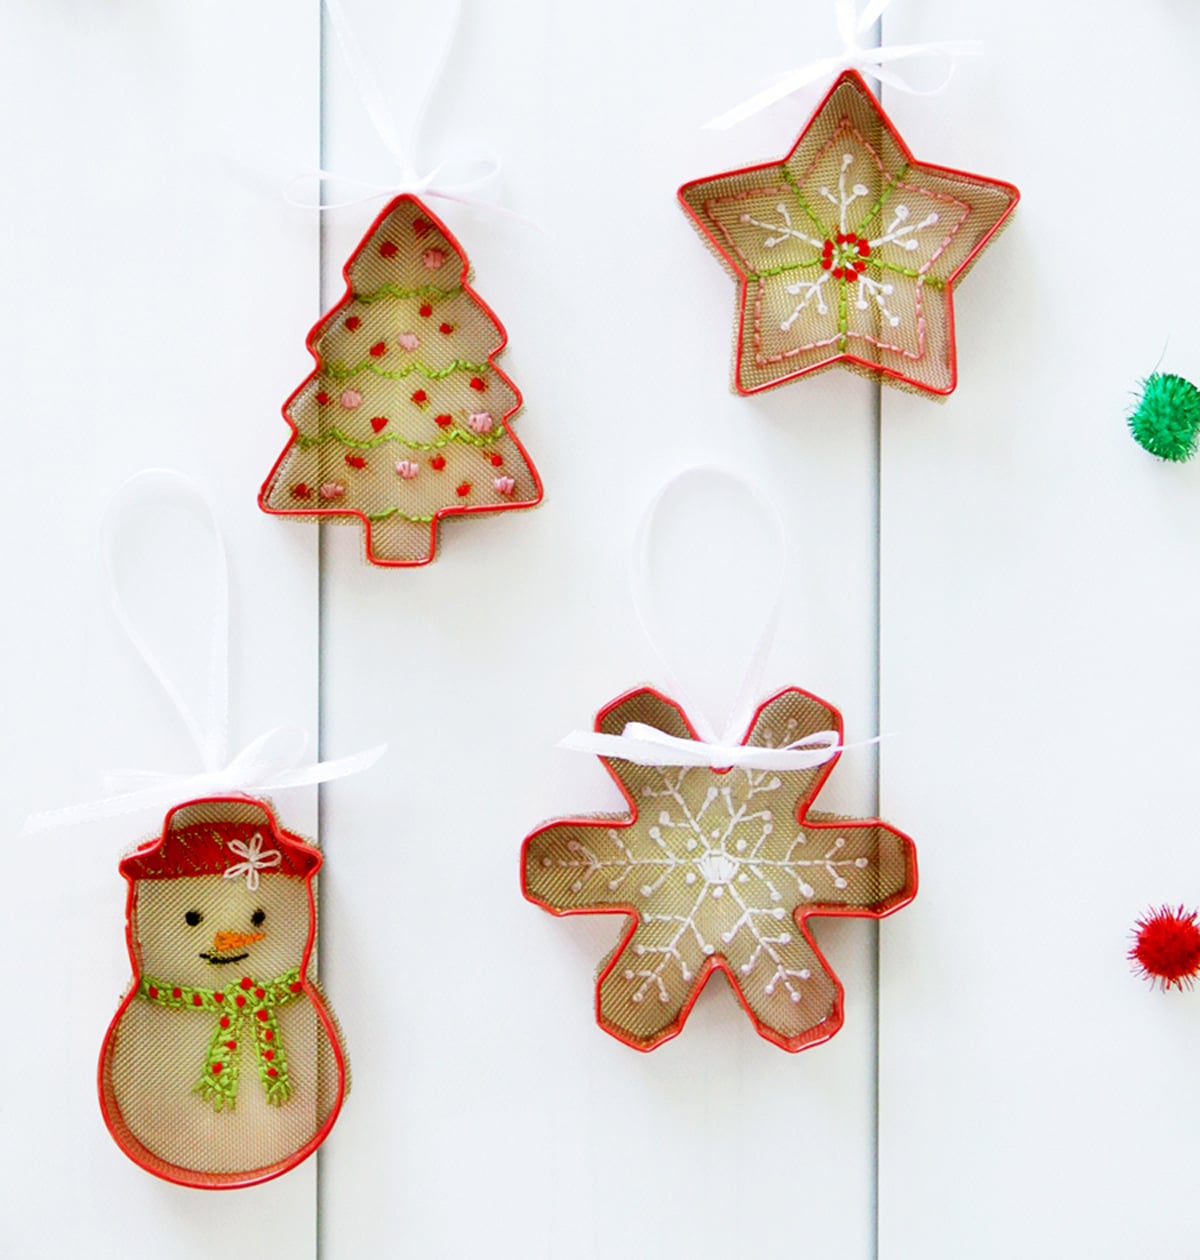 unique ornaments combine cookie cutters and mesh